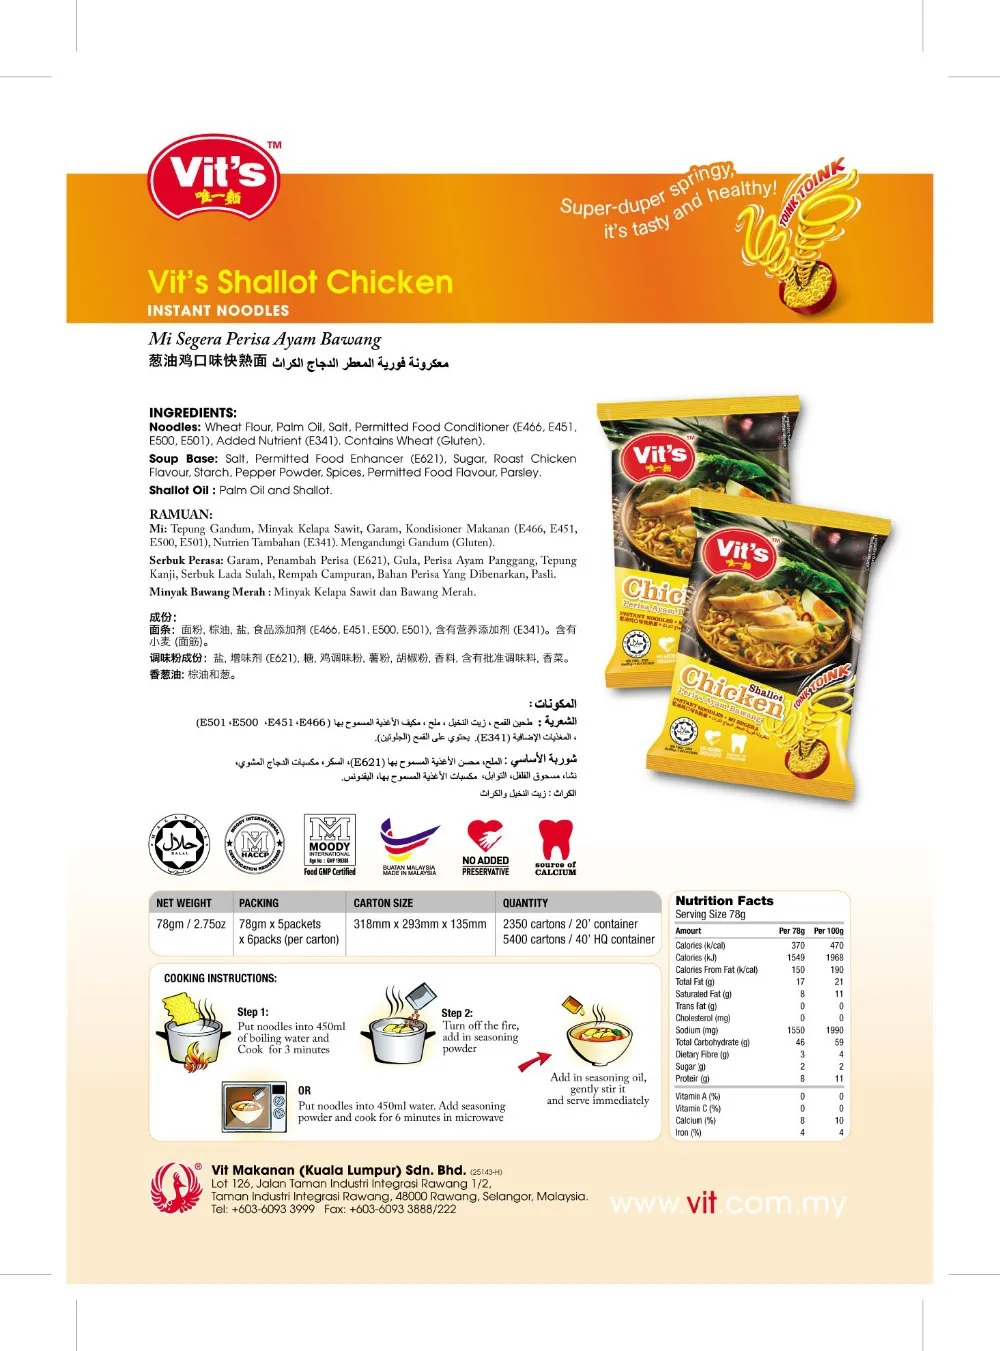 Vit's Shallot Chicken Instant Noodles (packet)